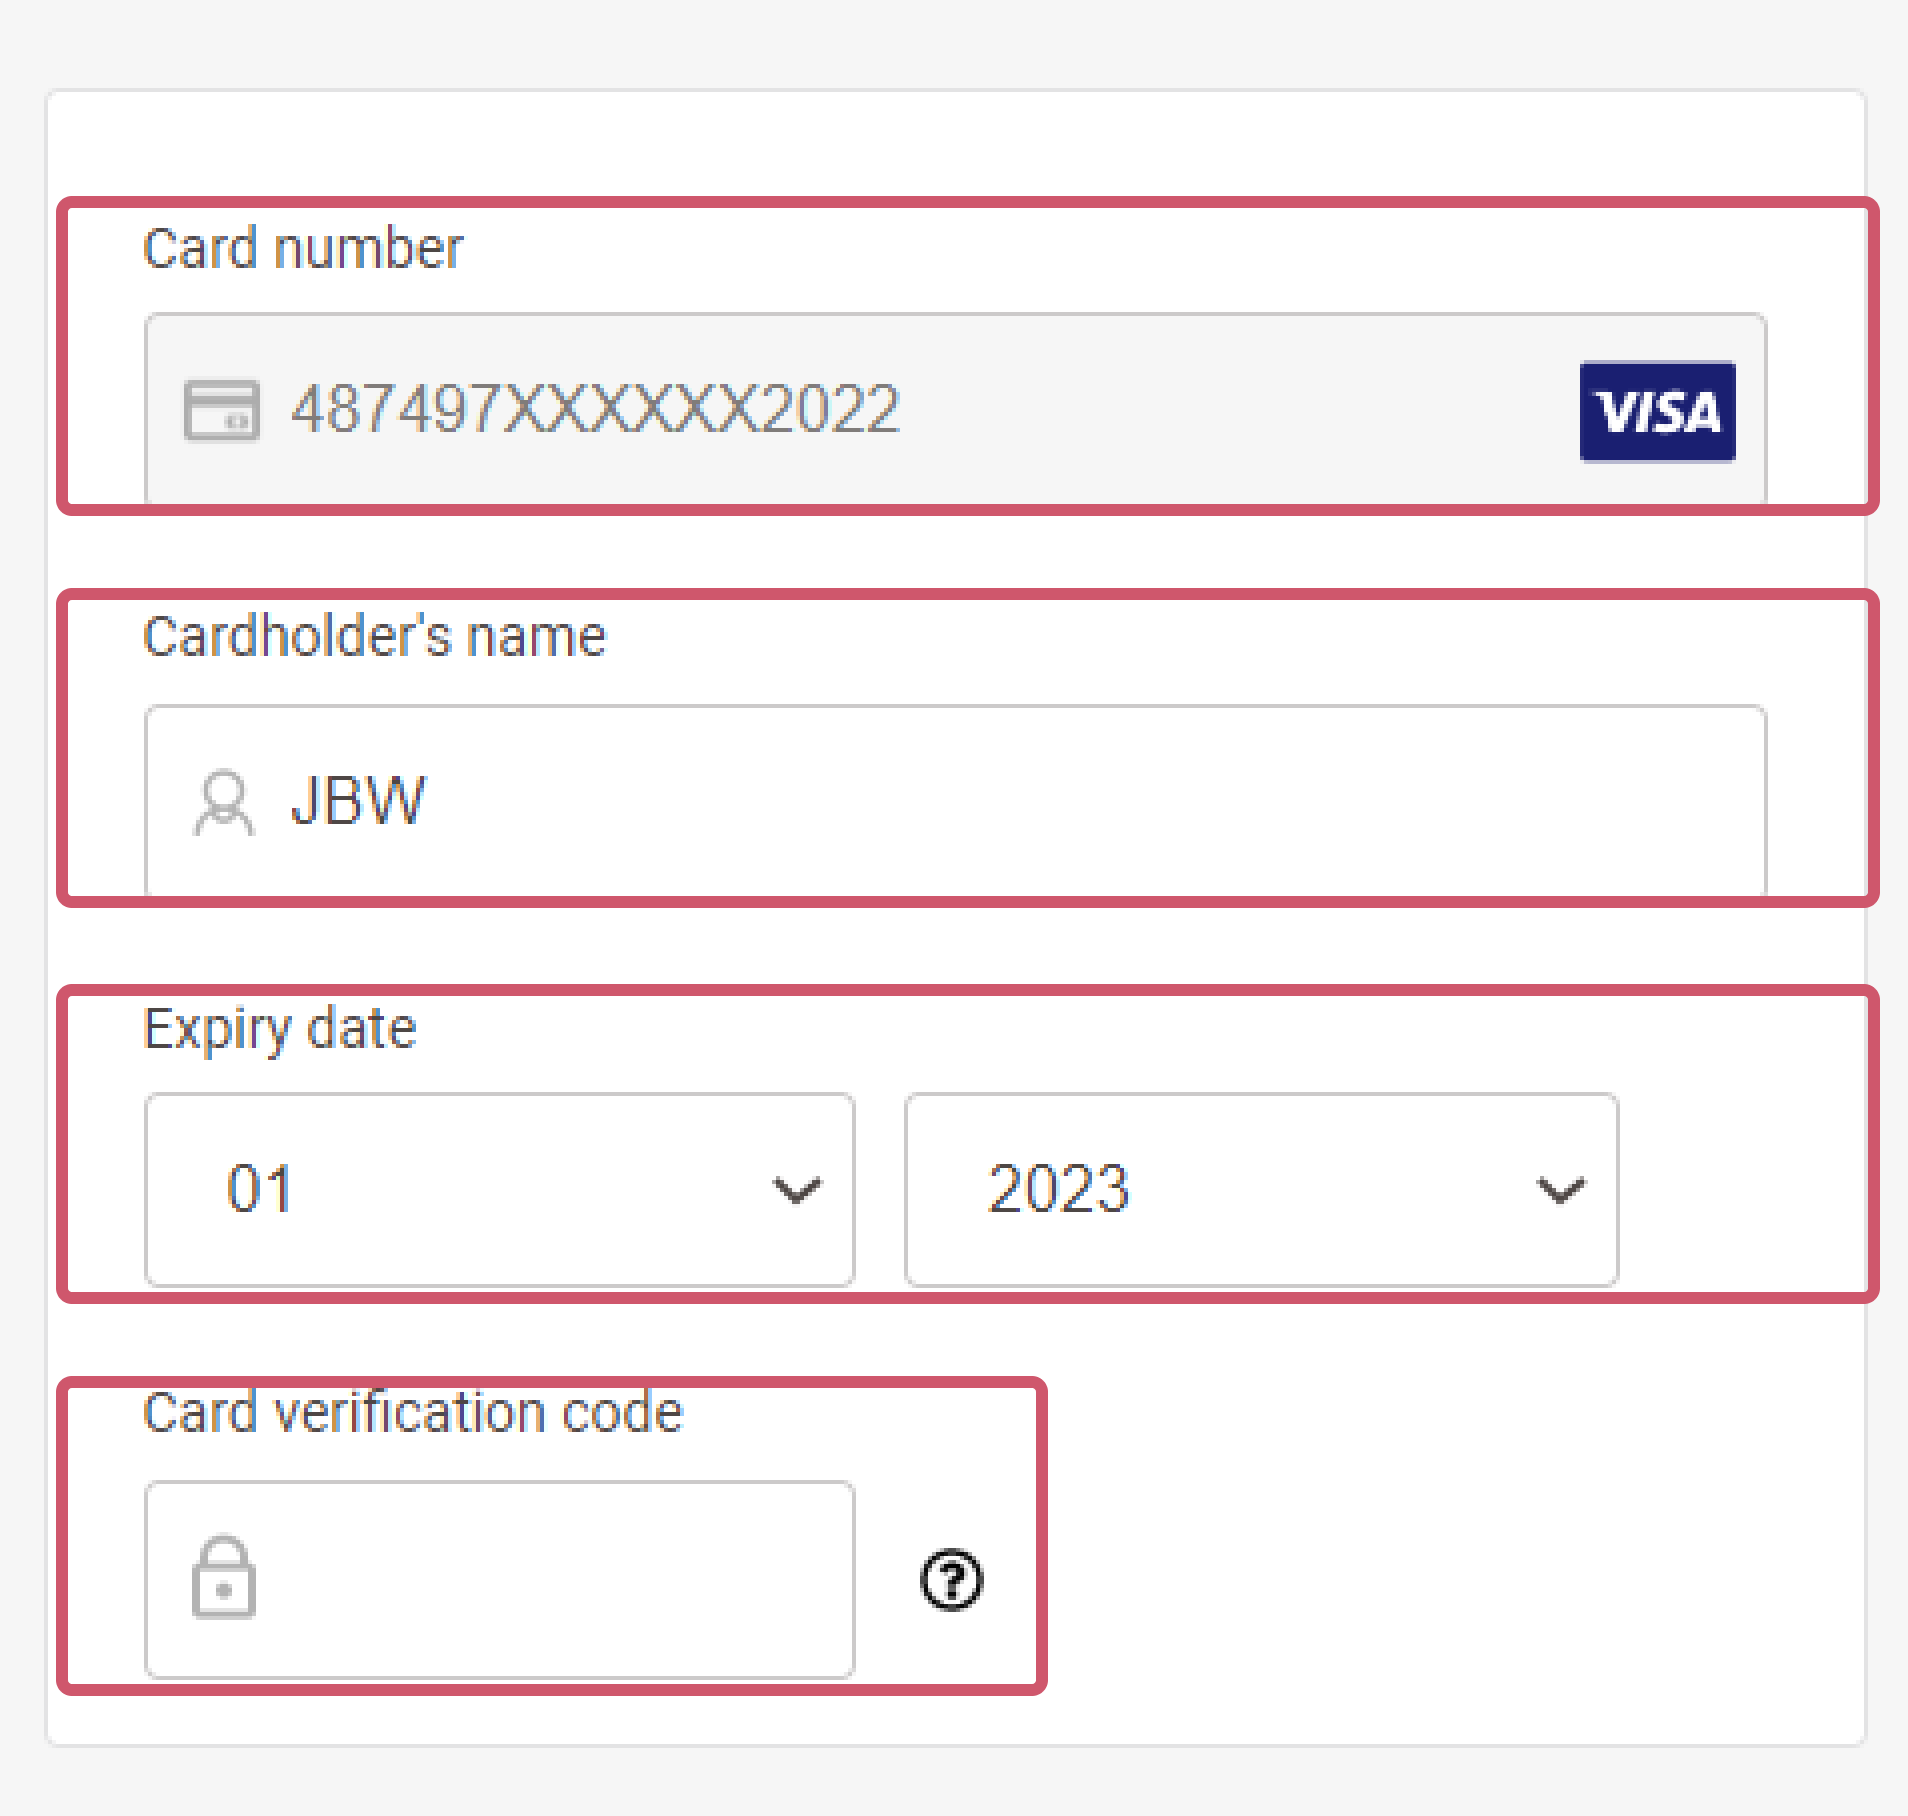 The image above shows the prefilled, editable fields on the Hosted Checkout Page when using an existing token. Only field “Card verification code” is empty, as the card holder needs to provide it.